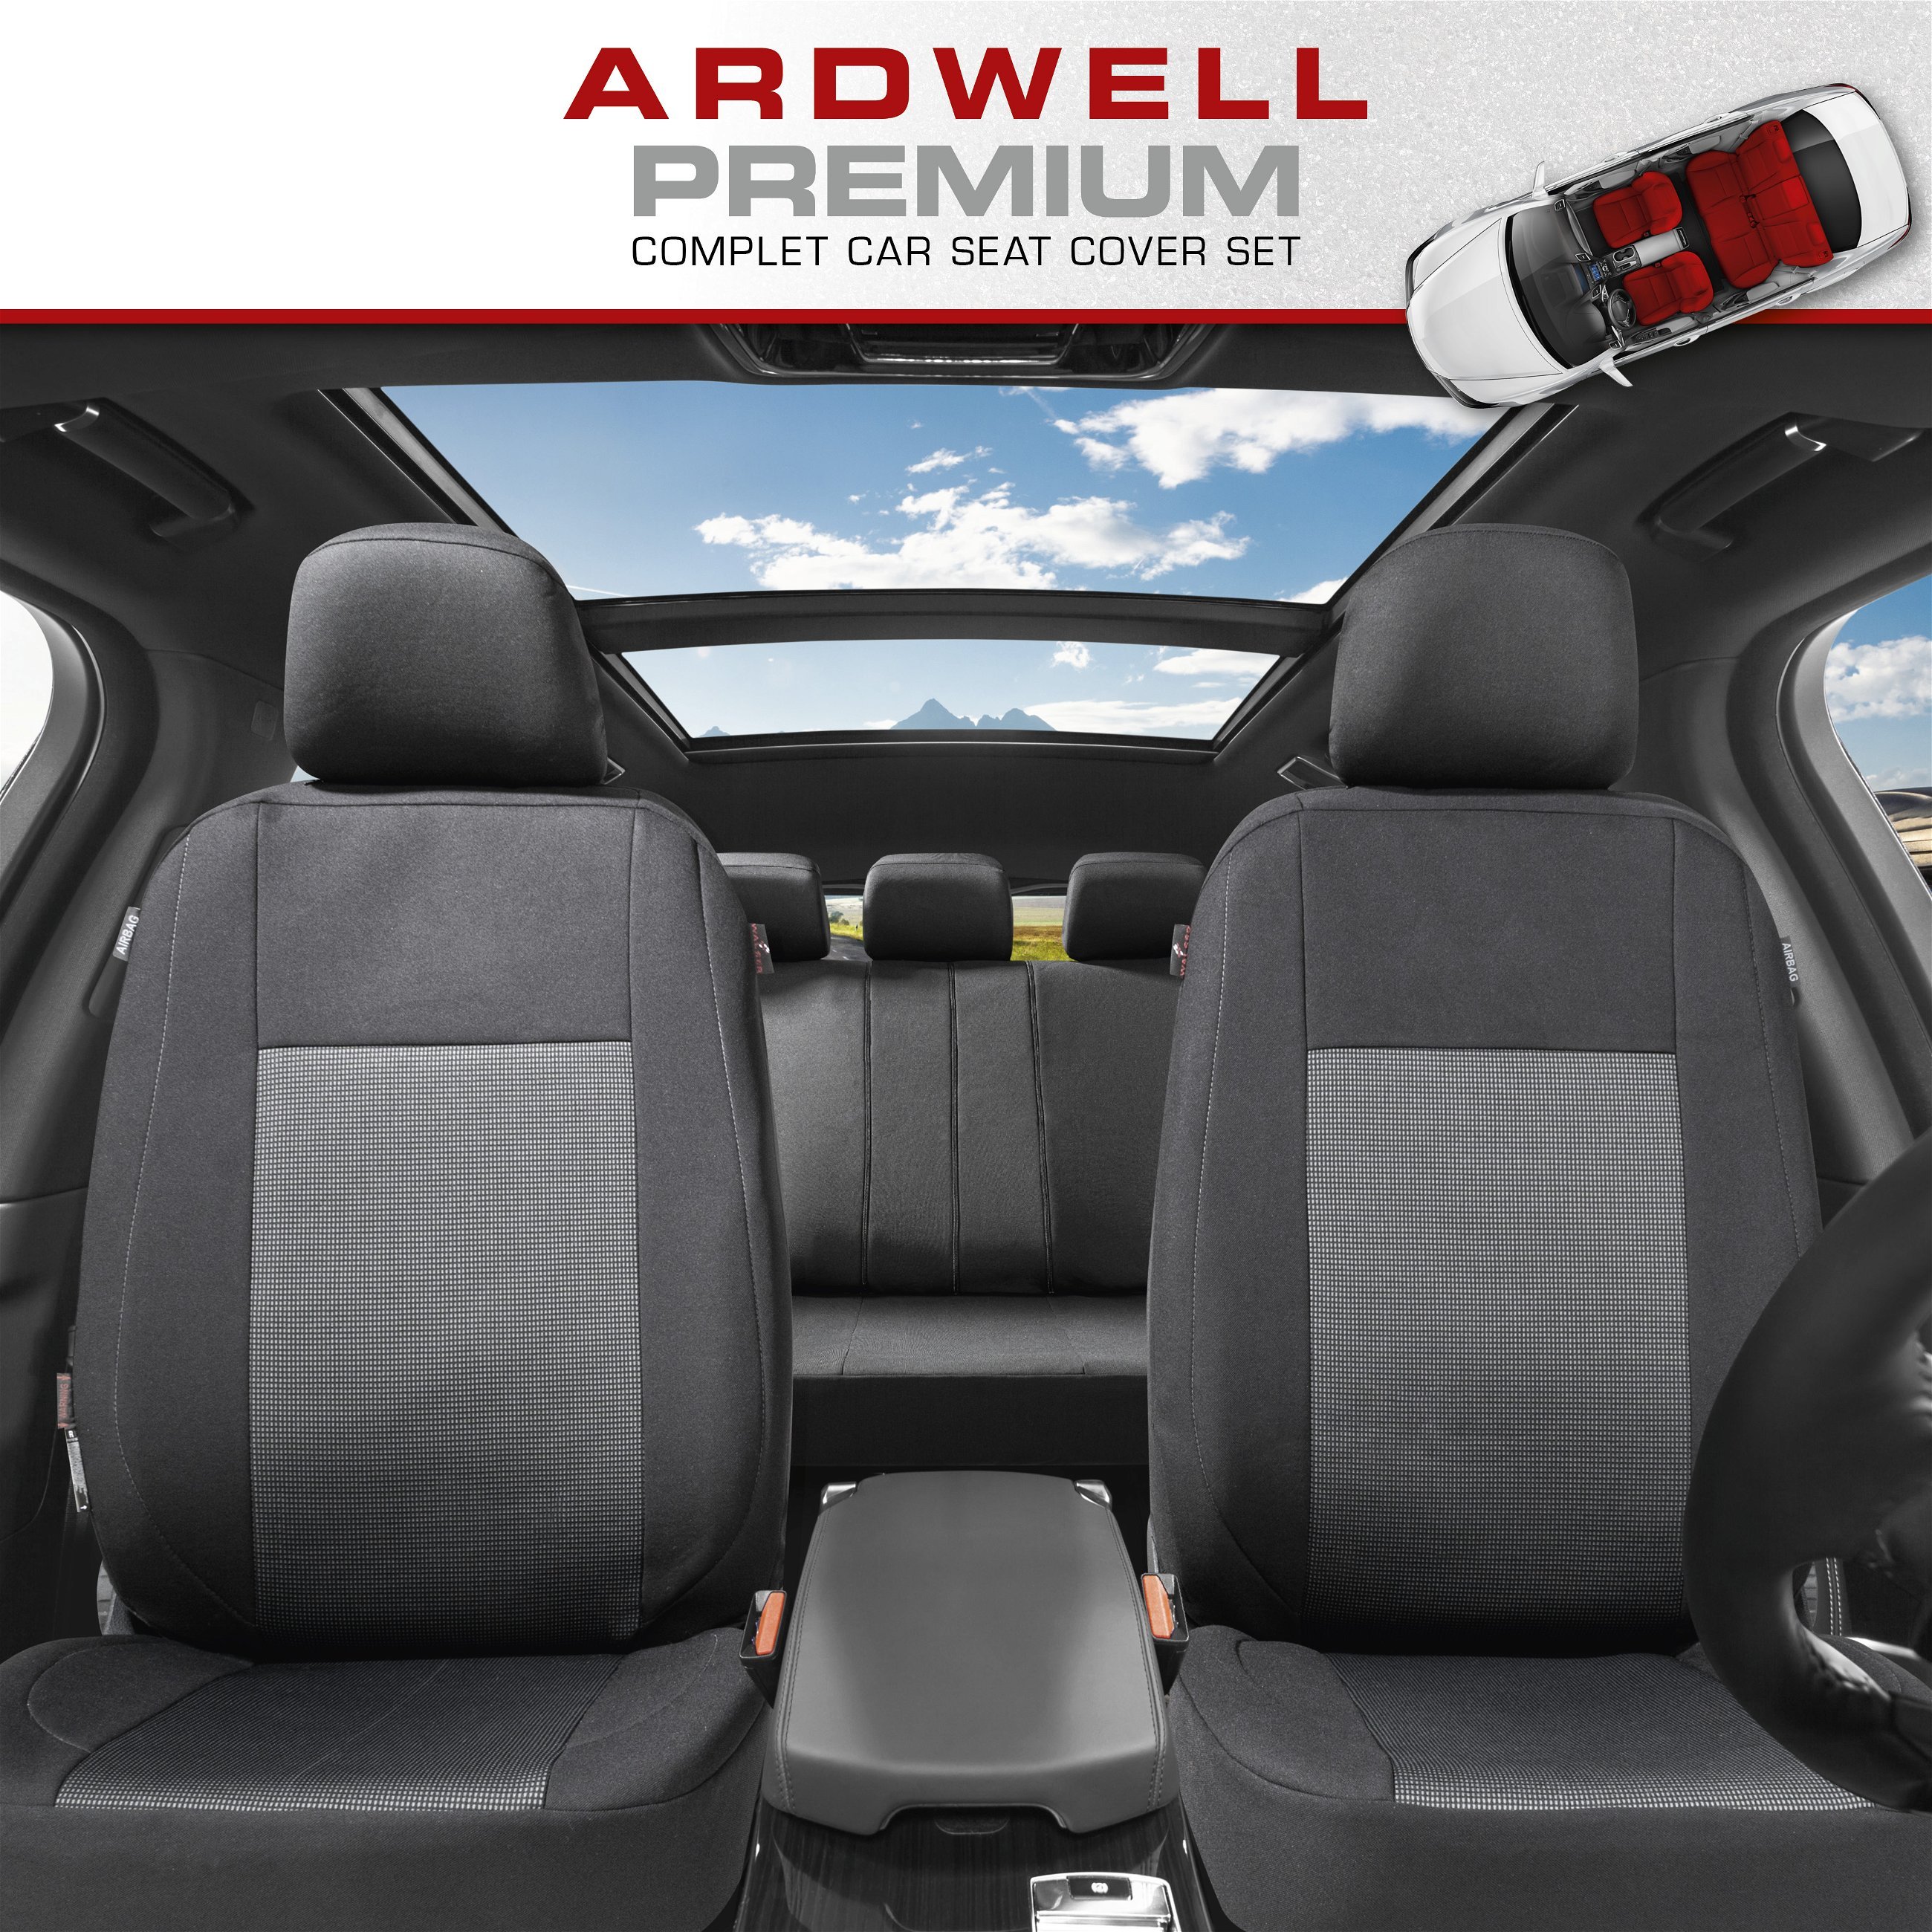 ZIPP IT Premium Car seat covers Ardwell complete set with zip-system black/grey